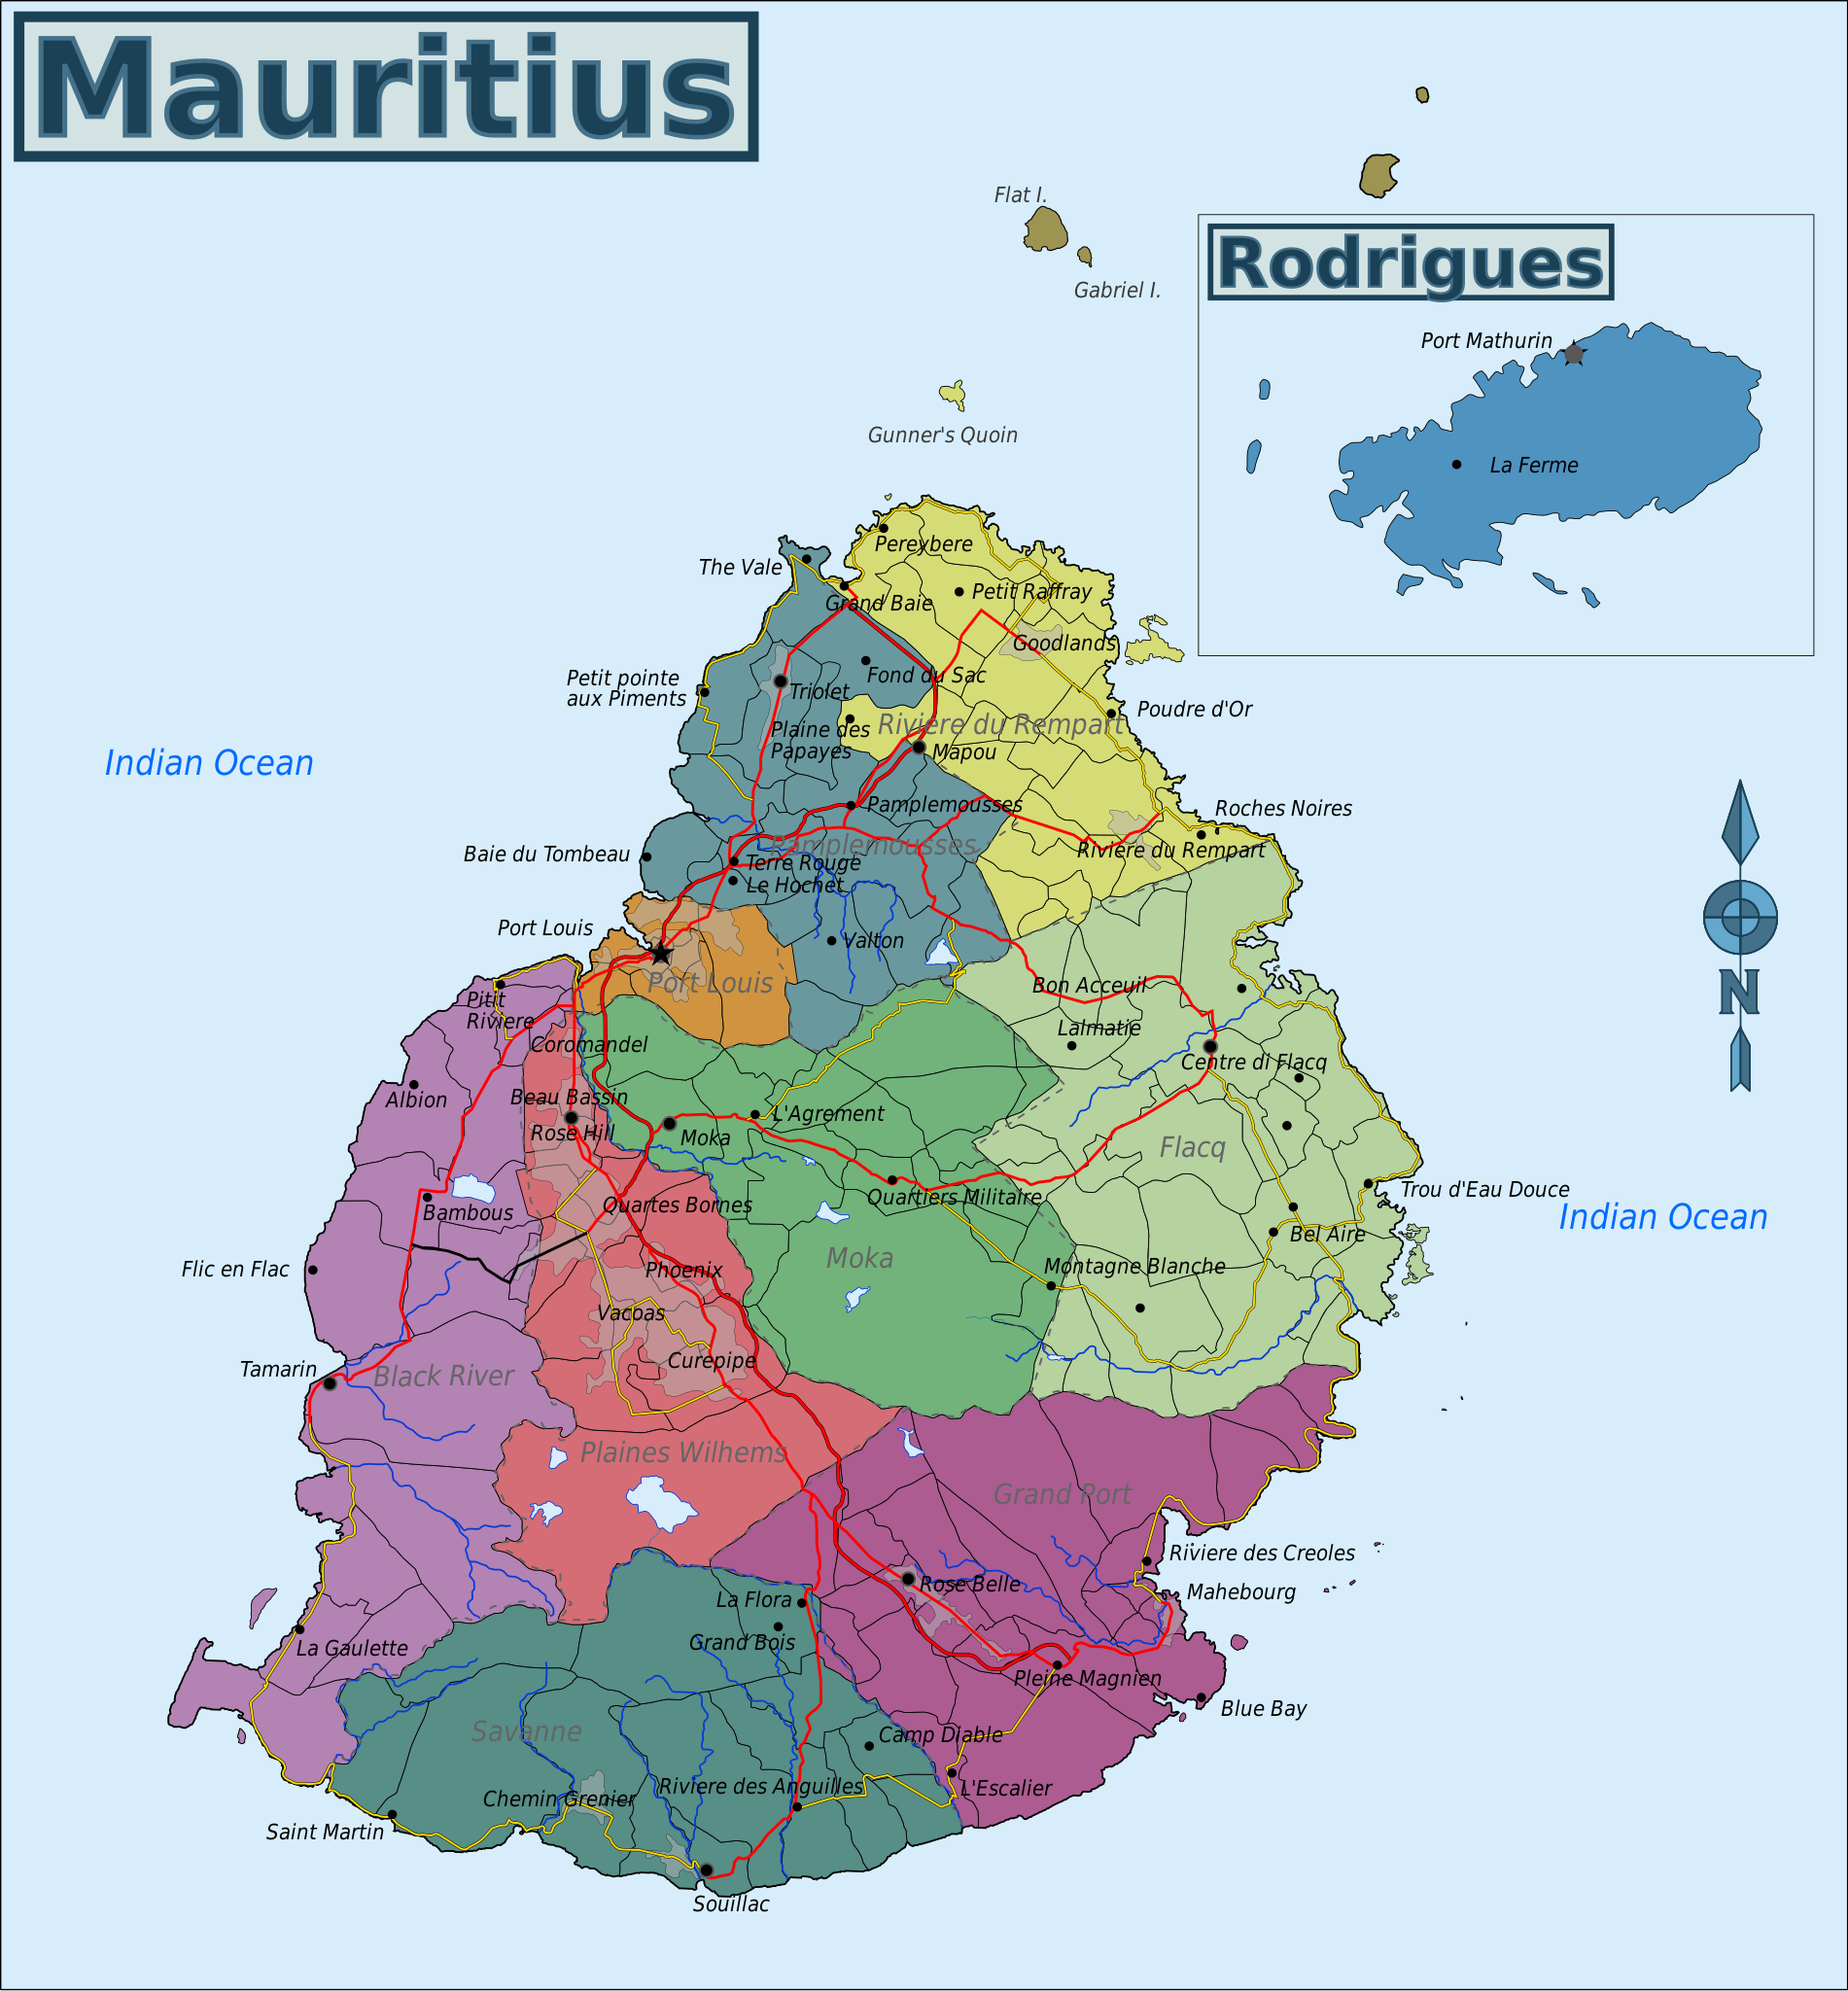 A detailed map of Mauritius